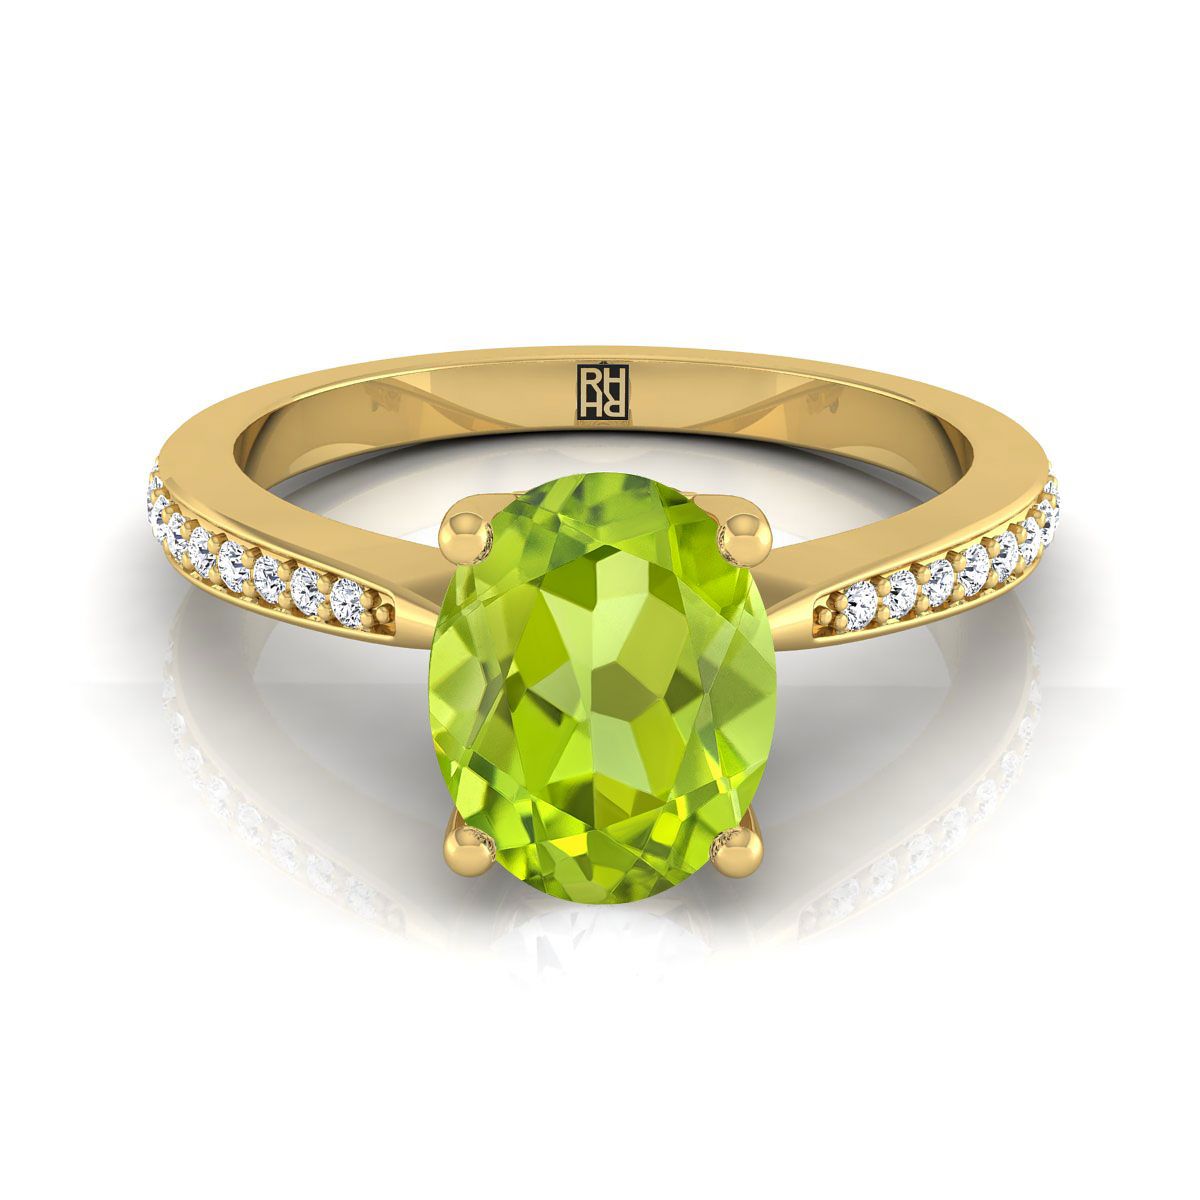 14K Yellow Gold Oval Peridot Tapered Pave Diamond Engagement Ring -1/8ctw